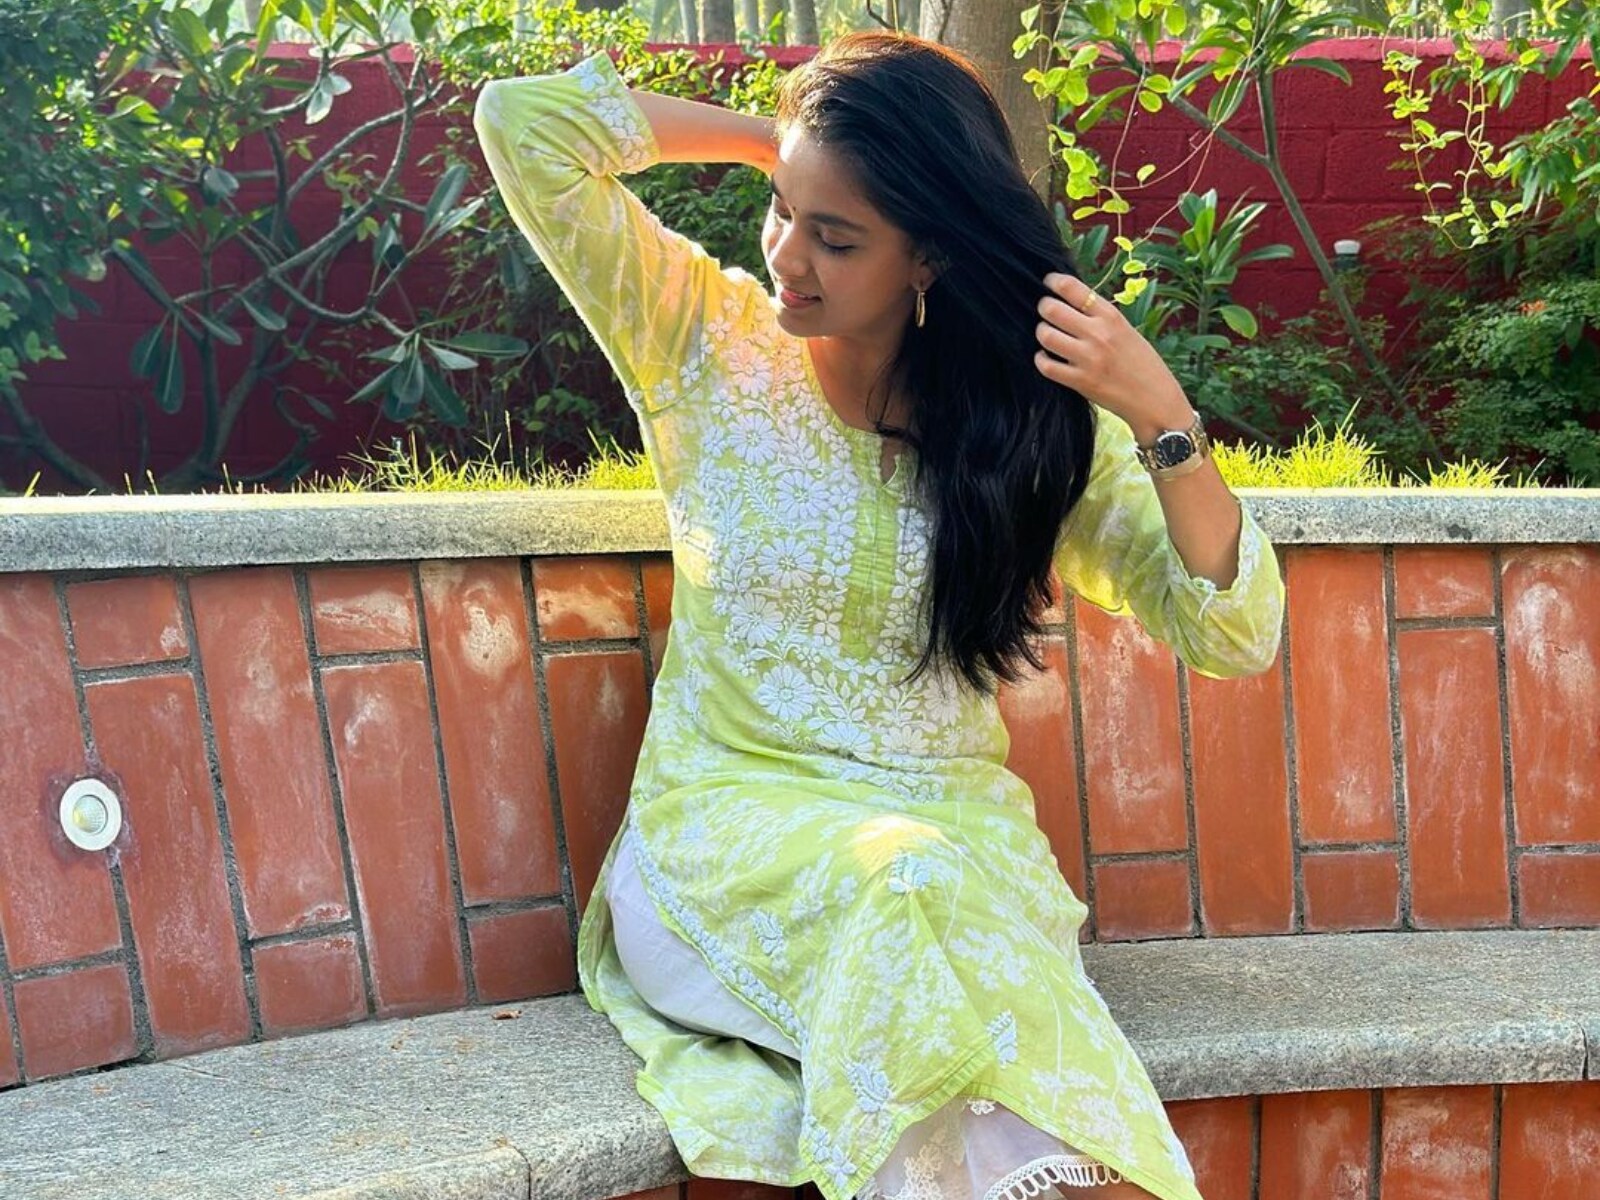 Keerthy Suresh Images Sex - Keerthy Suresh Reveals That One Thing That May Make Her Leave Films - News18